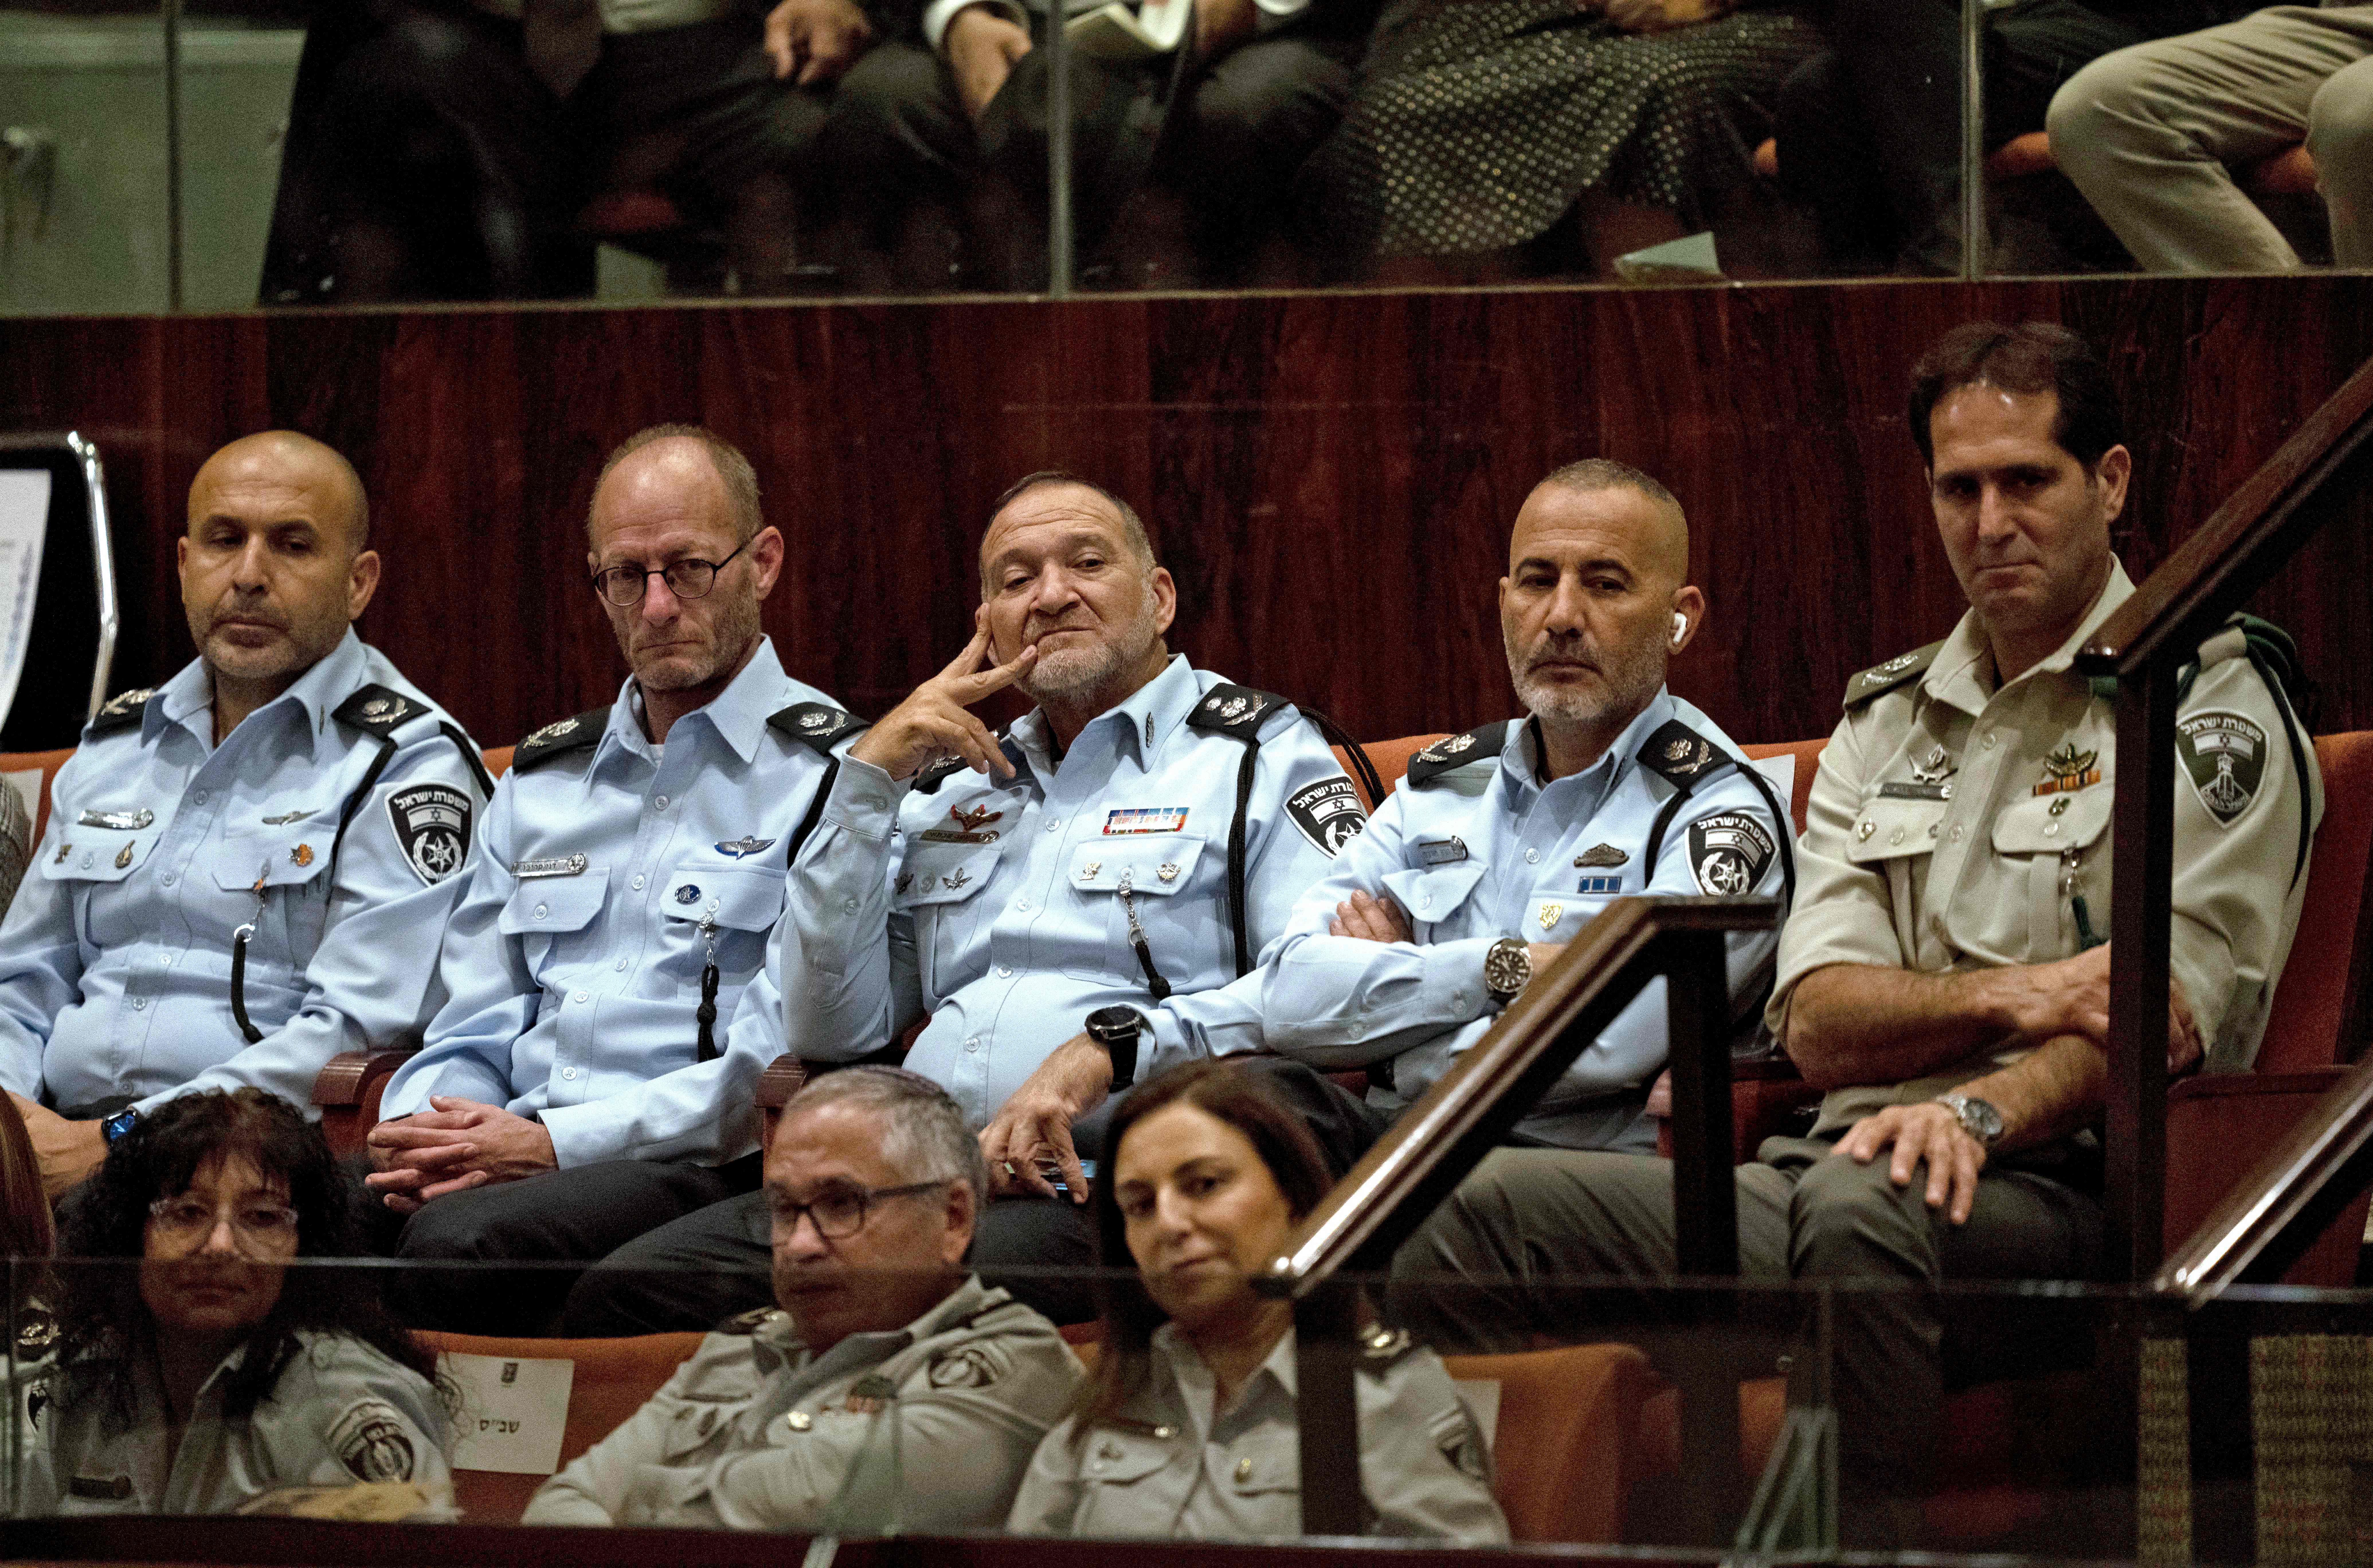 Israeli Police Commissioner Yaakov Shabtai attends the swearing-in ceremony of the new Israeli government at the Knesset last November. Shabtai said in an Arabic TikTok video this week that any Israelis showing solidarity with Gaza should leave the country.